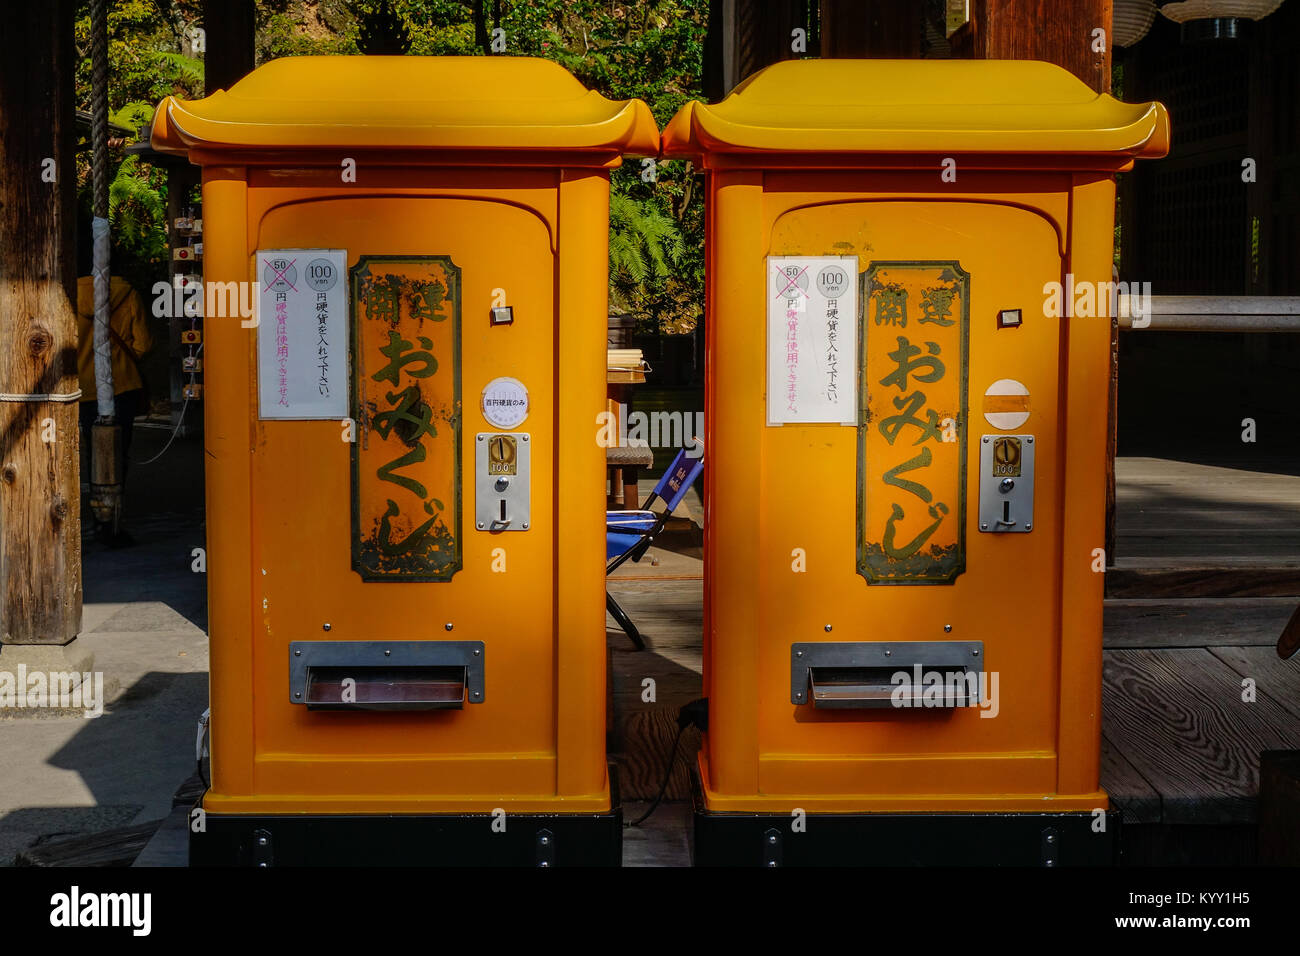 Kyoto, Japan - Dec 26, 2015. Yellow mail boxes at Kinkakuji Pagoda in Kyoto, Japan. Kinkakuji is a Zen temple in Kyoto whose top two floors are comple Stock Photo